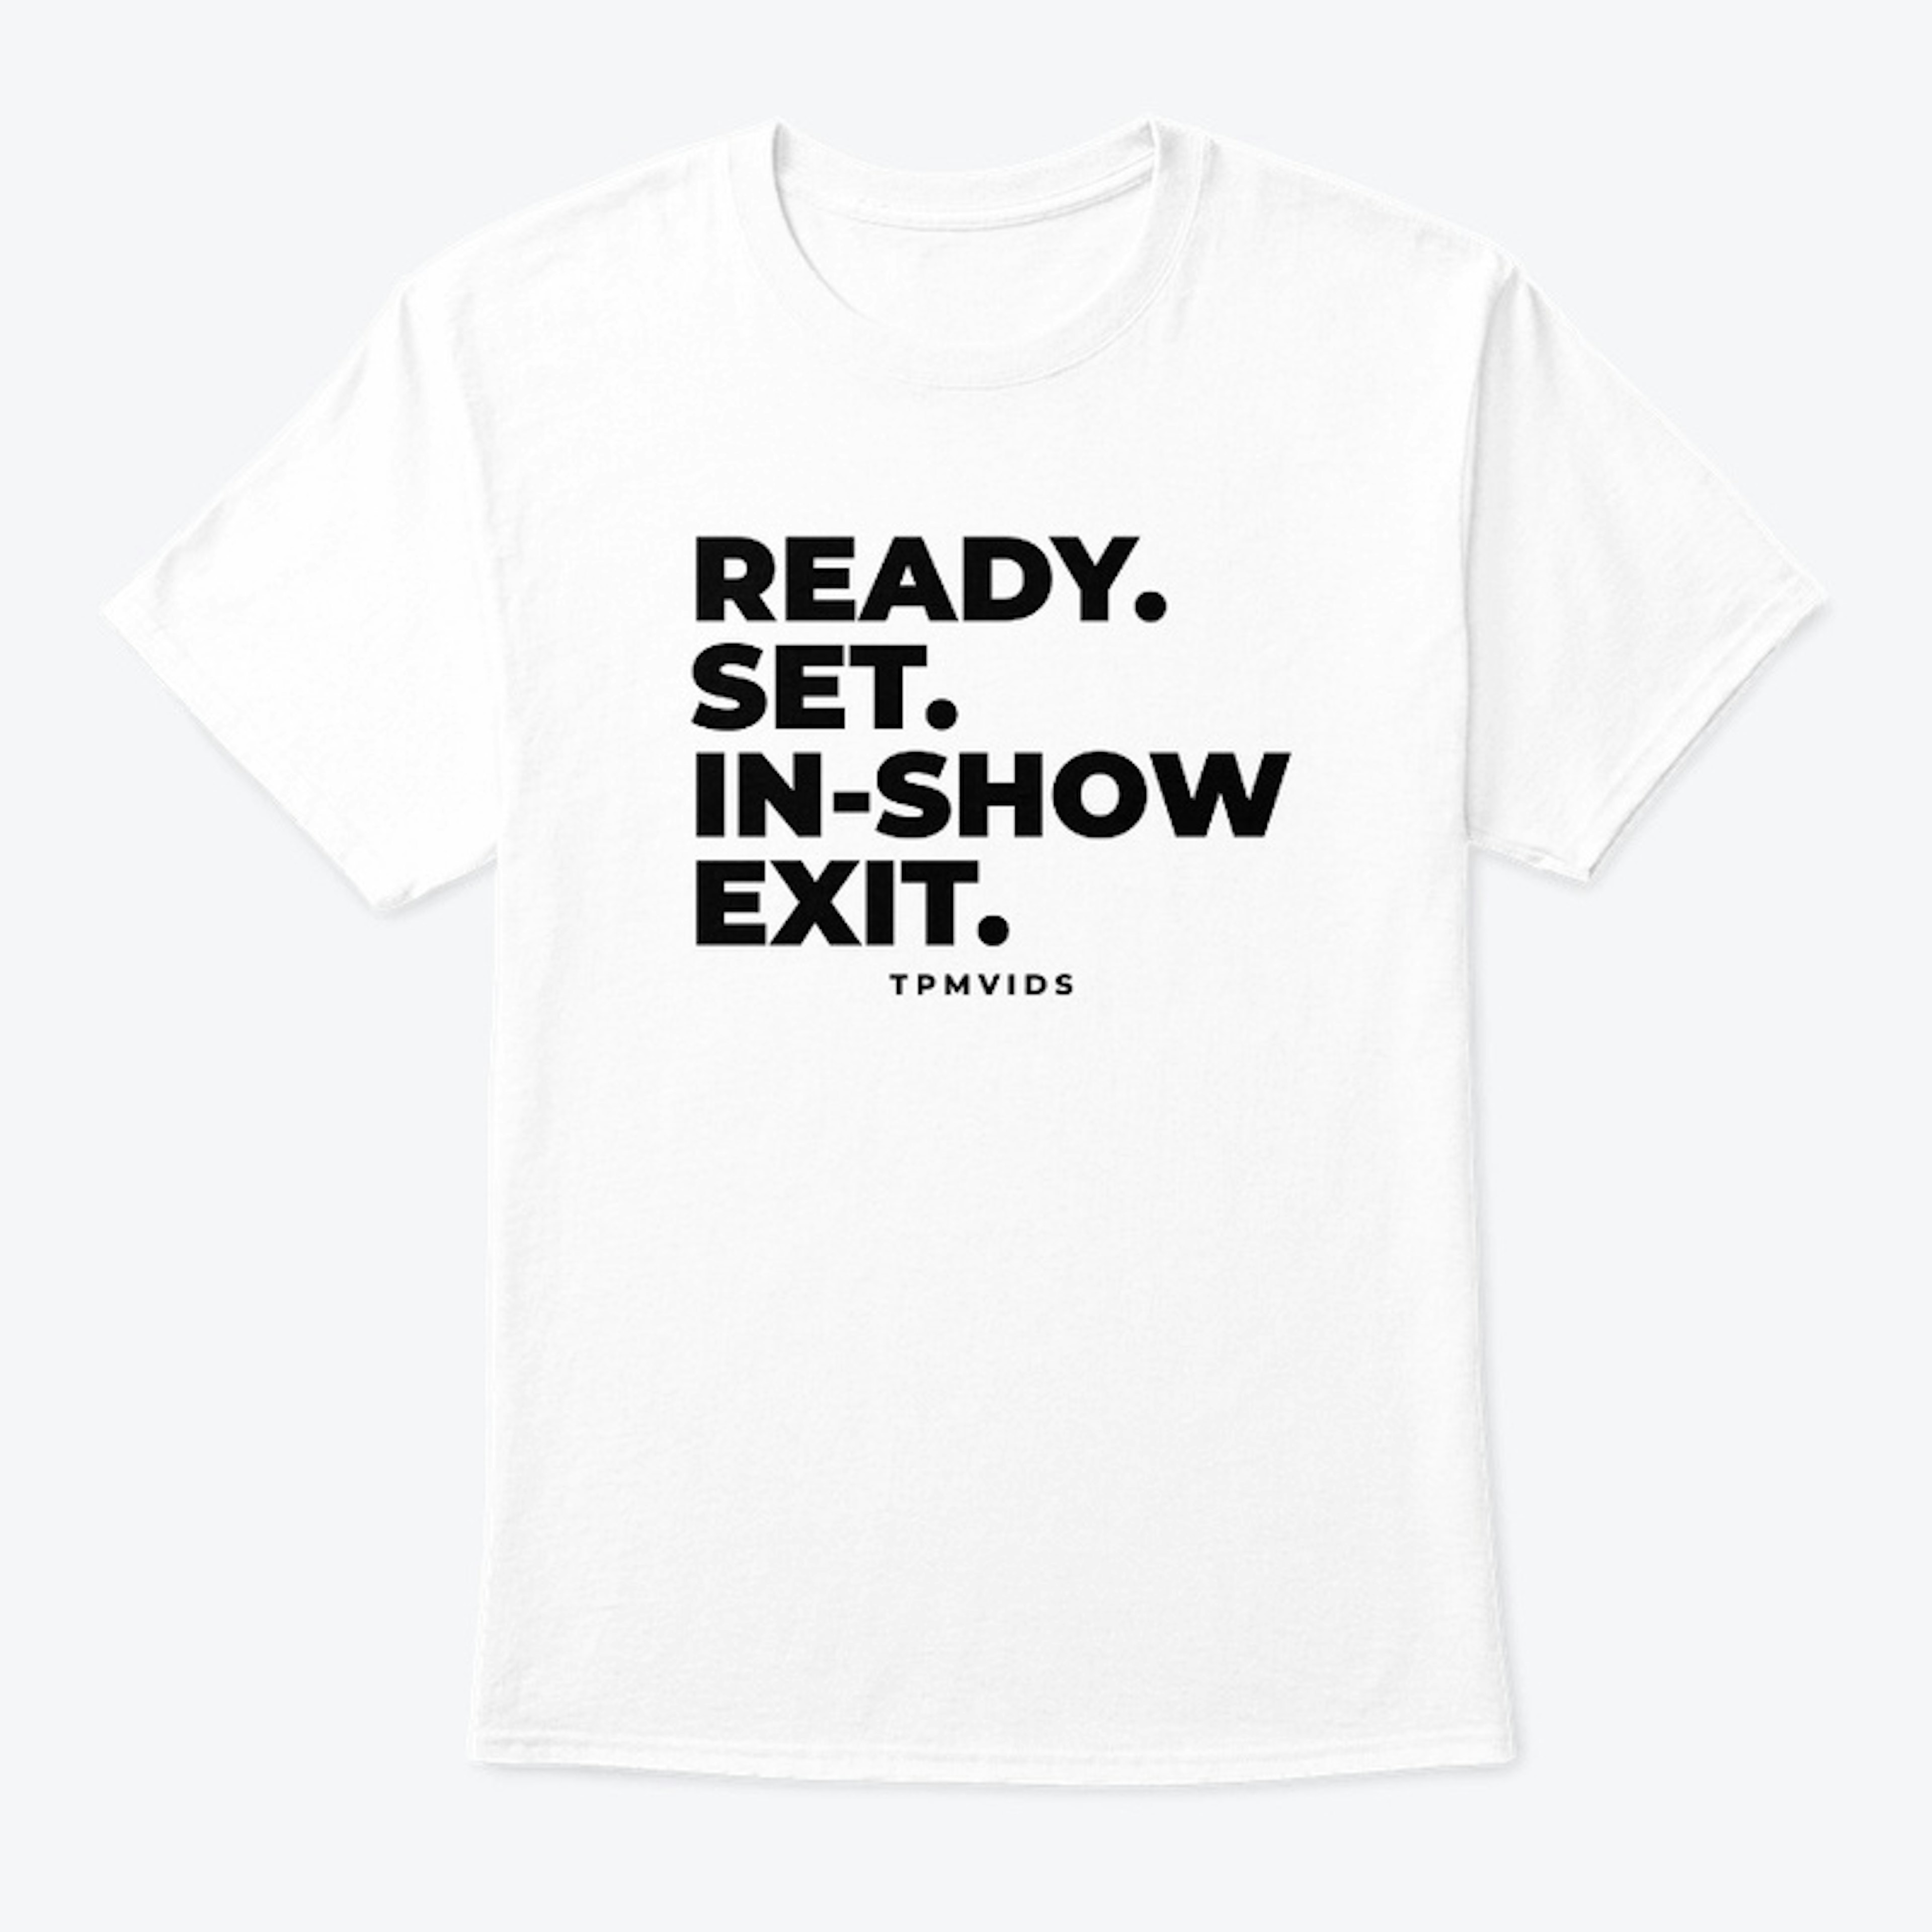 NEW- Ready. Set. In-Show Exit.